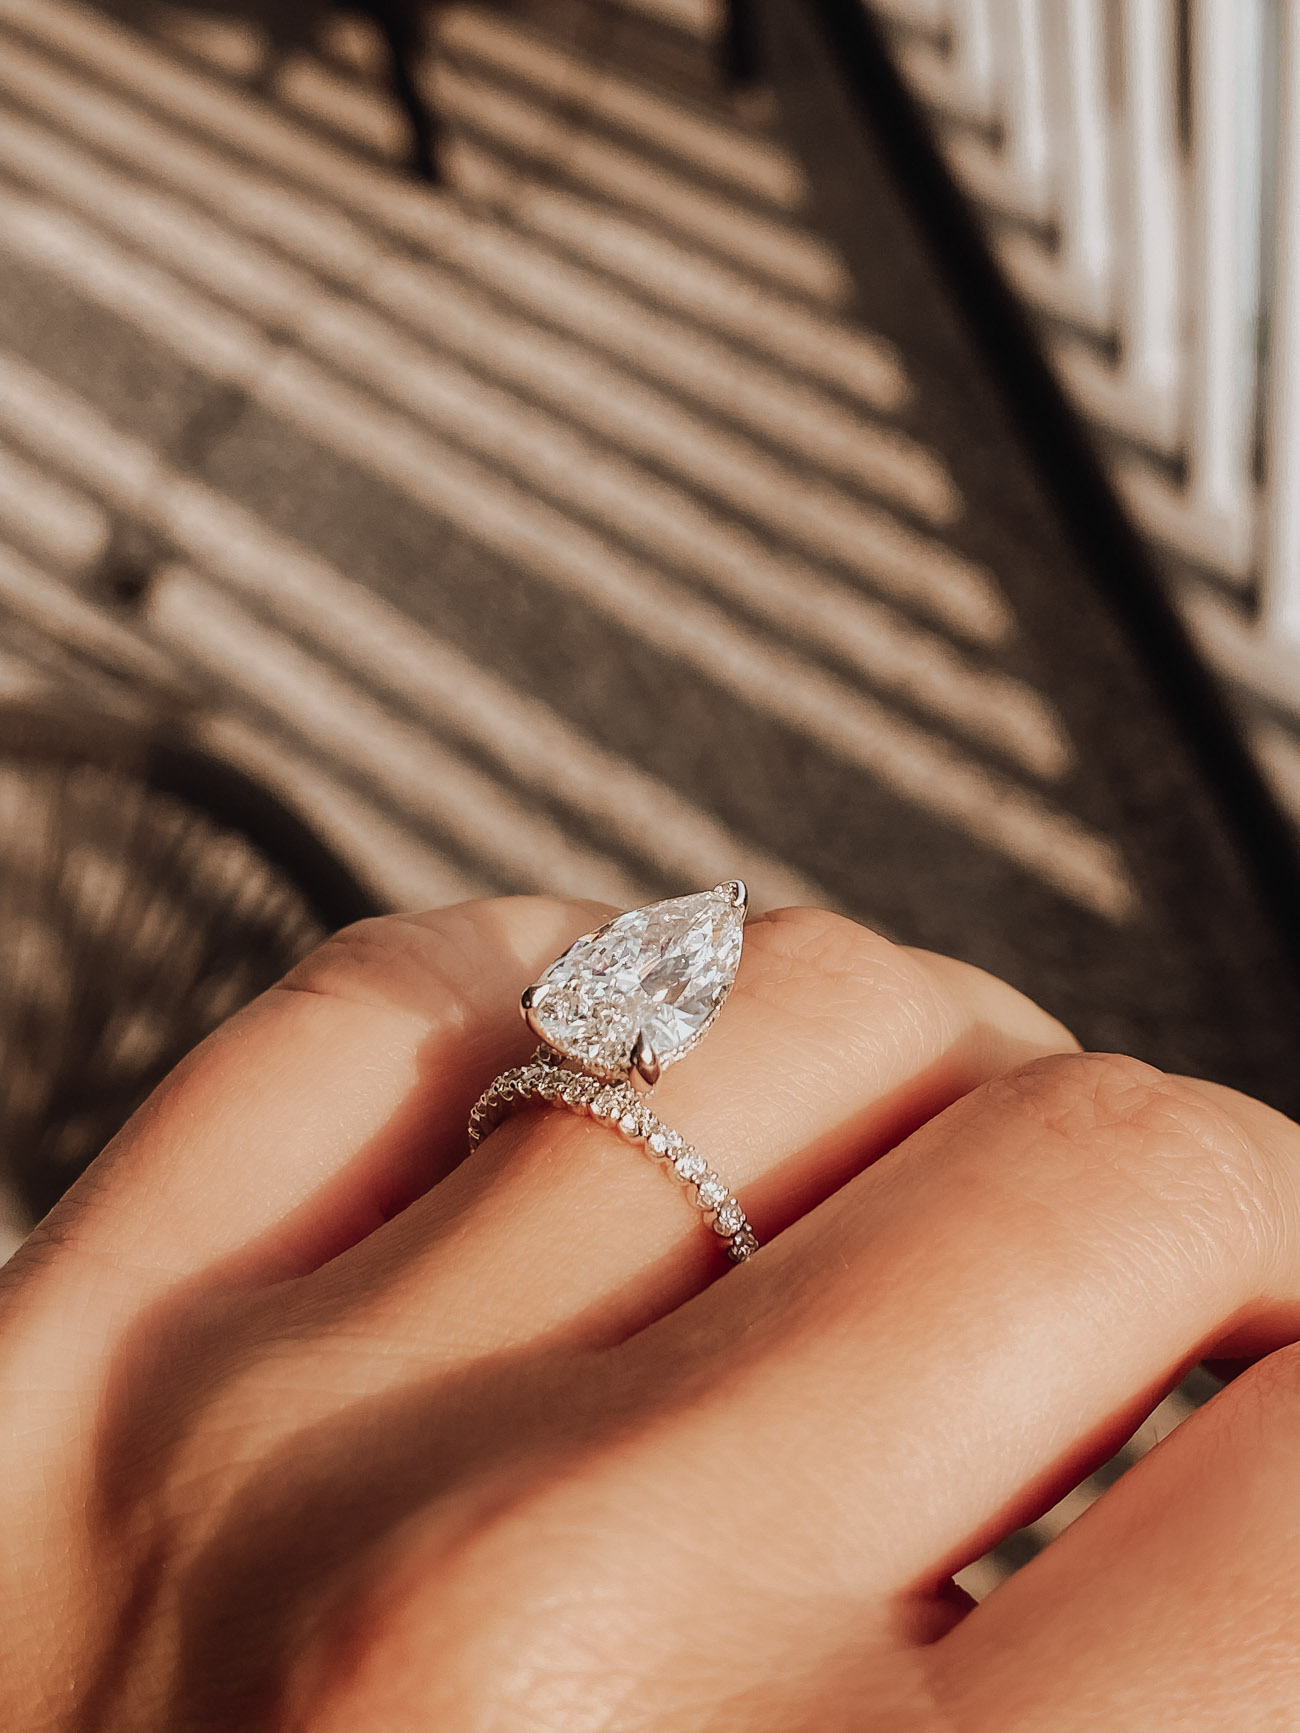 Engaged | Hayley Larue Engagement | Proposal | Pear Shape Engagement Ring | Hayley Larue Engagement Ring | Diamond Ring | Happy Jewelers | Blondie in the City